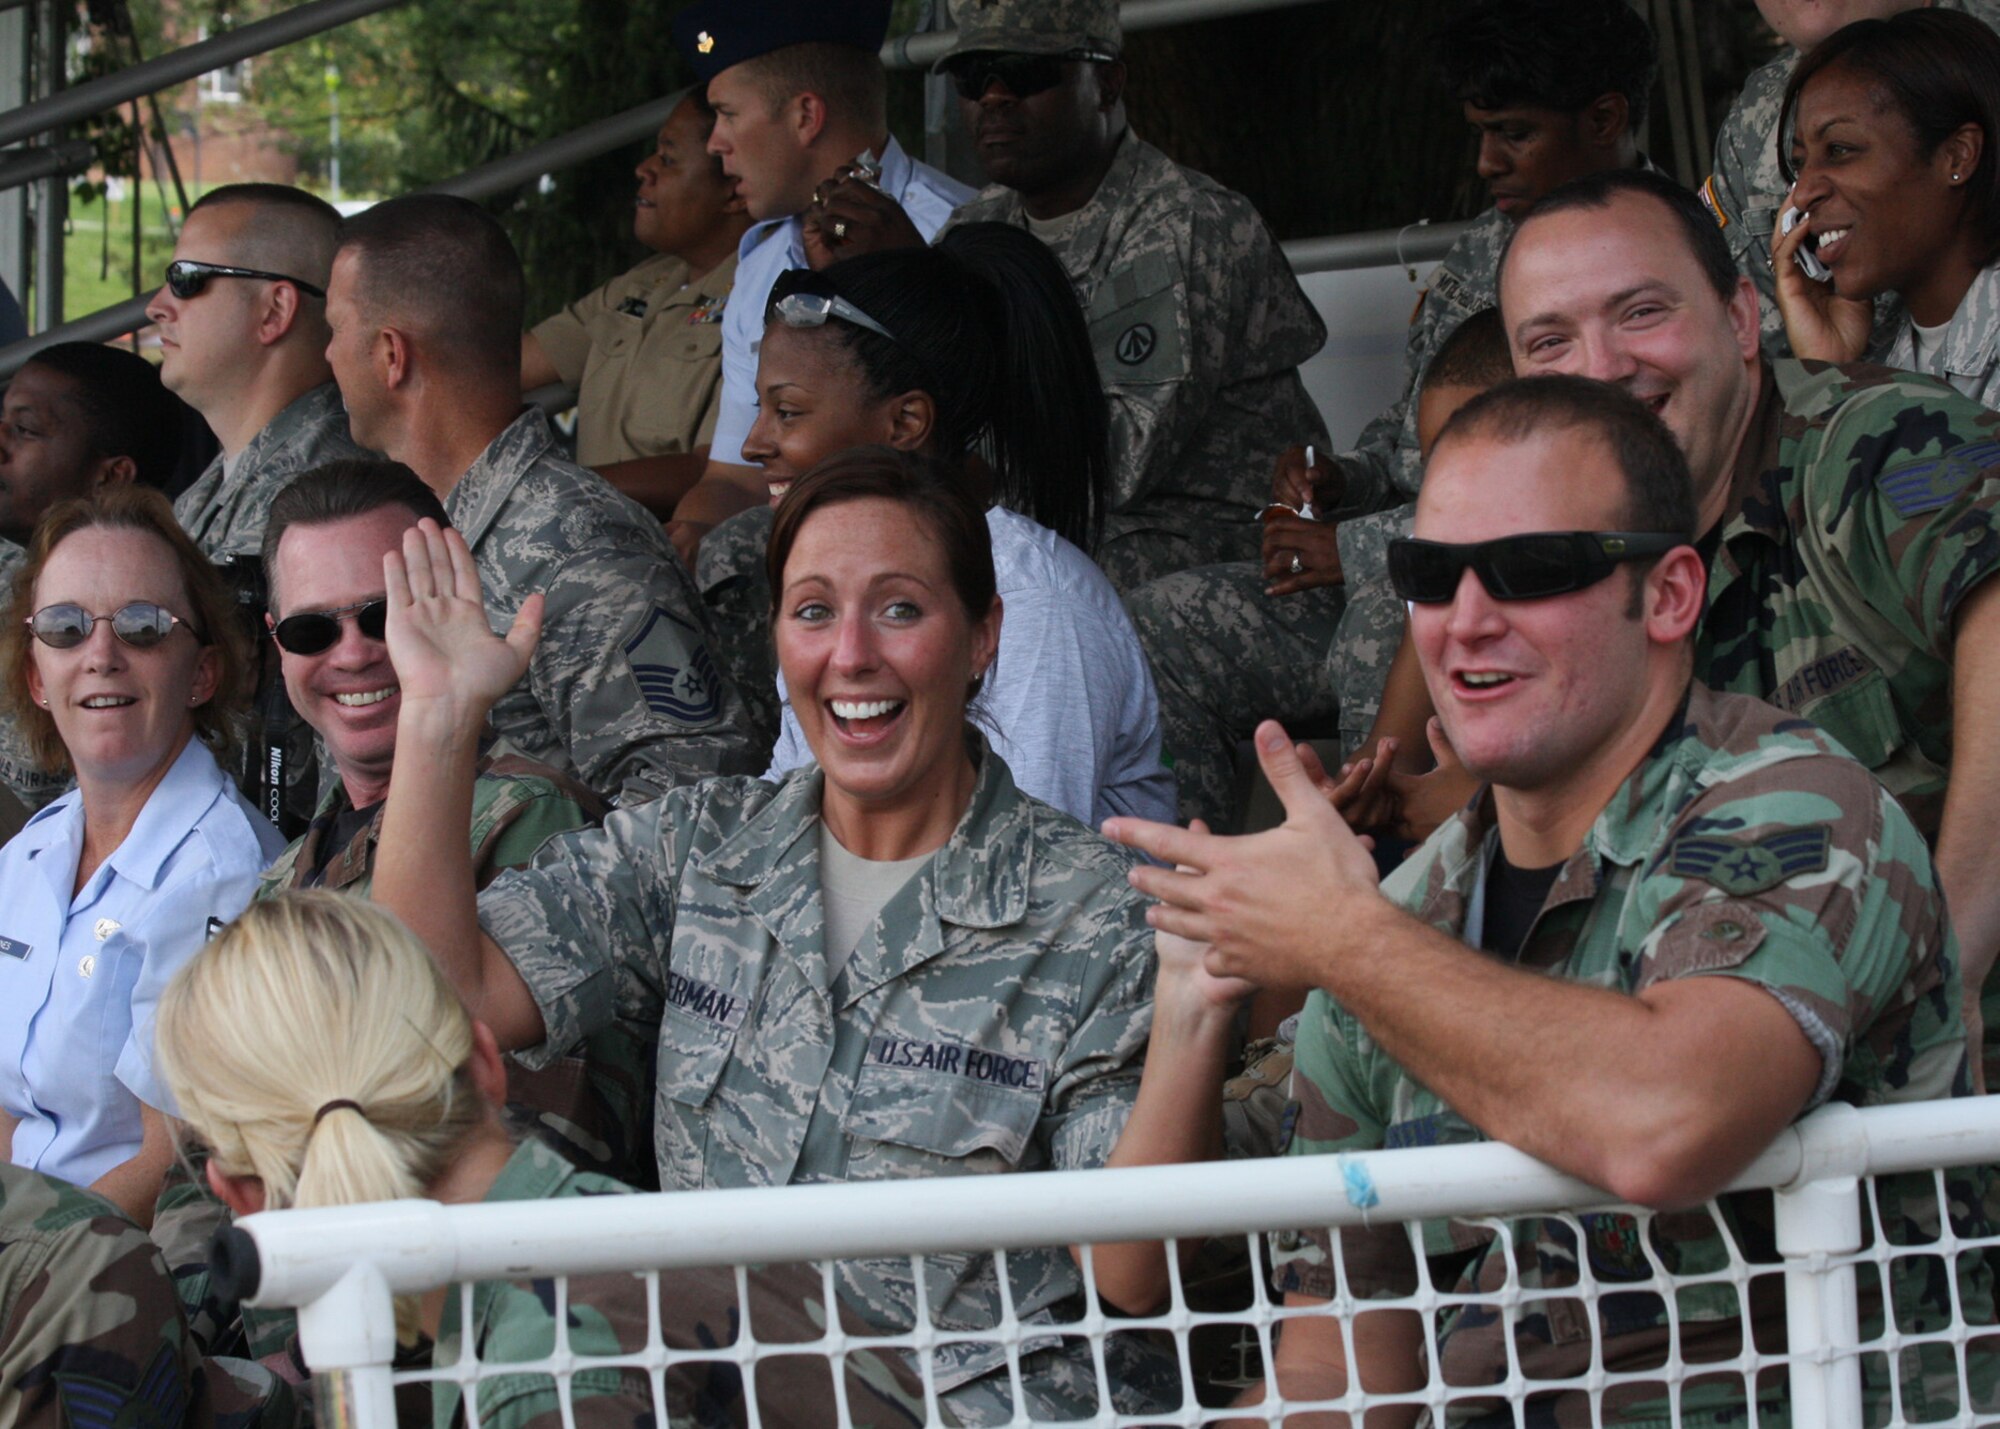 On August 19, 2009, Technical Sergeant Christine Catherman, and other members of the United States military enjoy a day at McDaniel College during Military Appreciation Day during Baltimore Ravens training camp. (U.S. Air Force photo by MSgt. Lou Deveaux, 175th Wing/Public Affairs, WARFIELD AIR NATIONAL GUARD BASE, Maryland, United States)